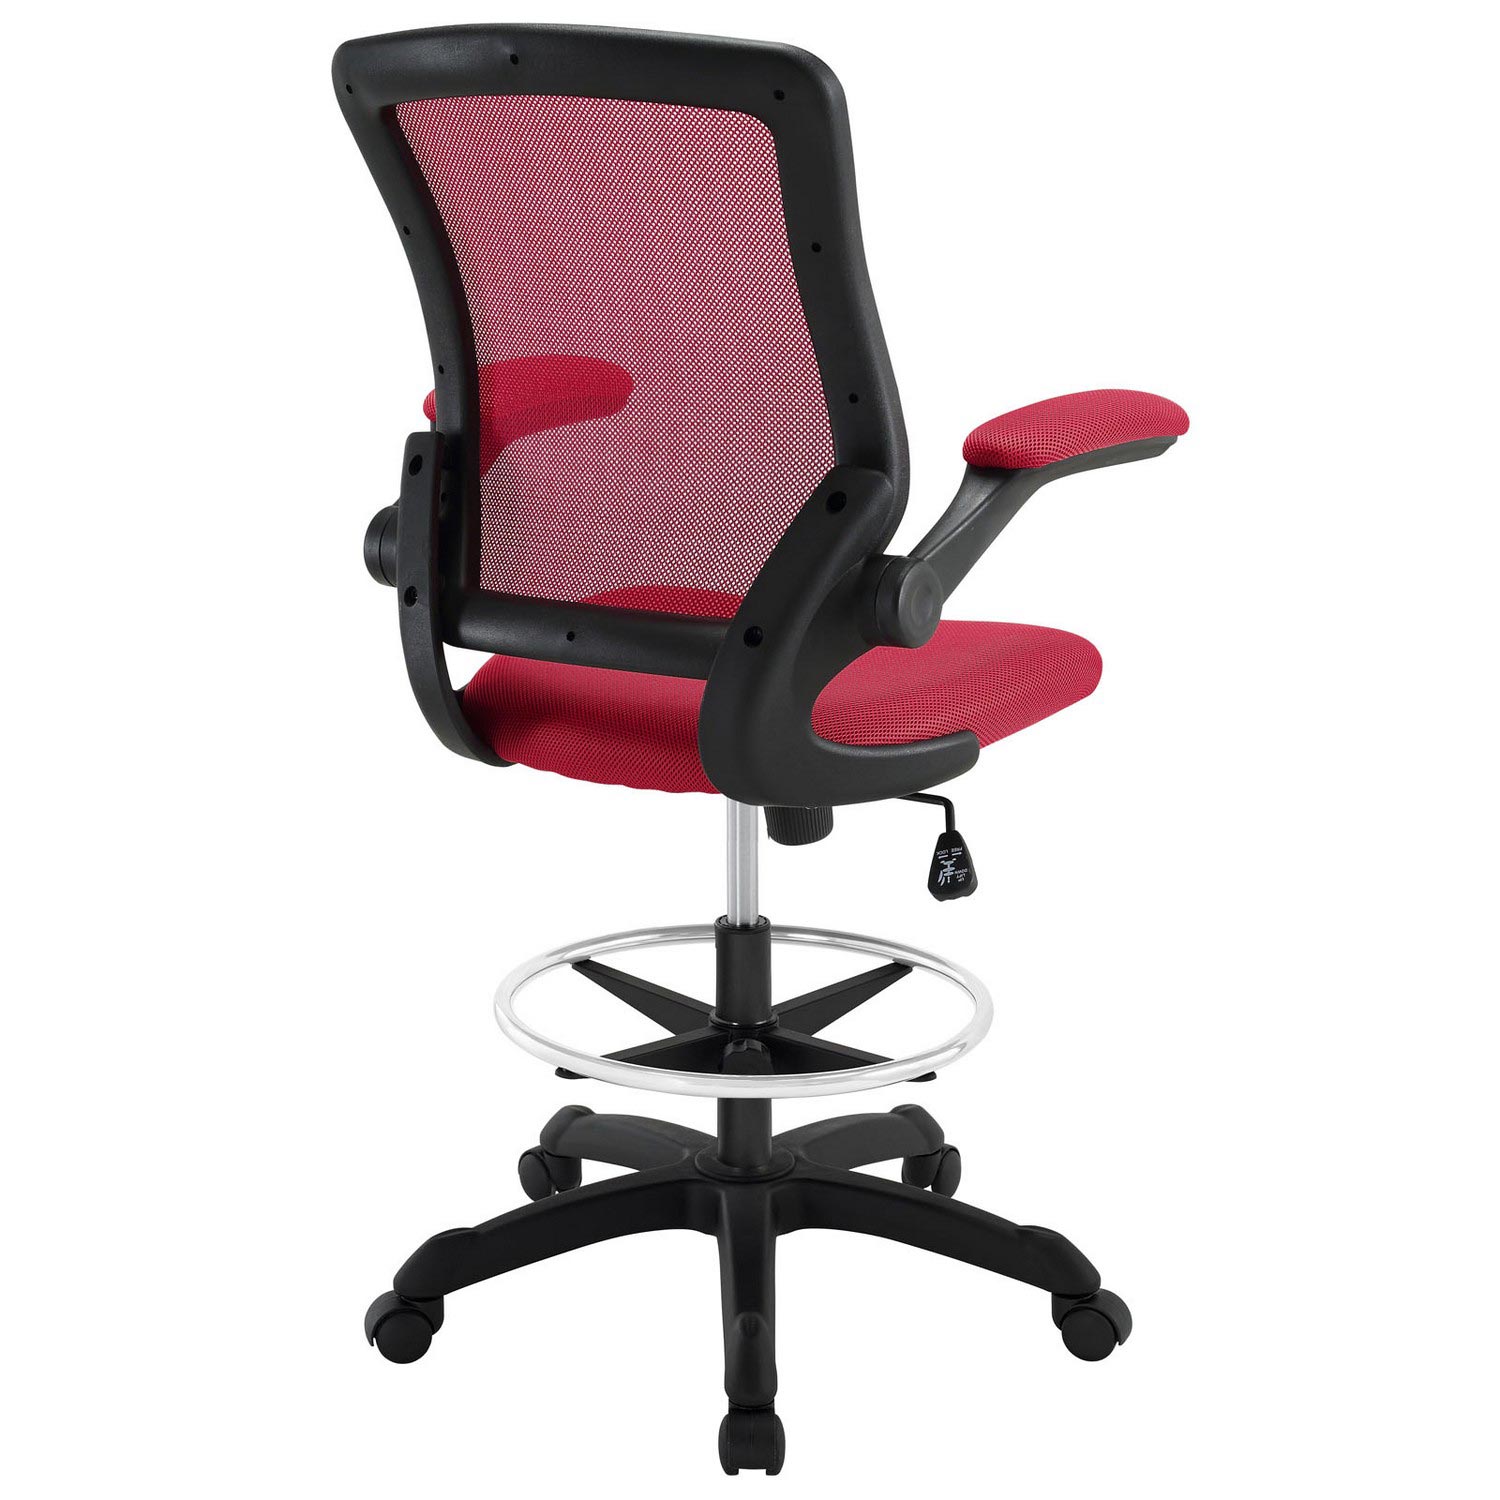 Modway Veer Drafting Stool - Red